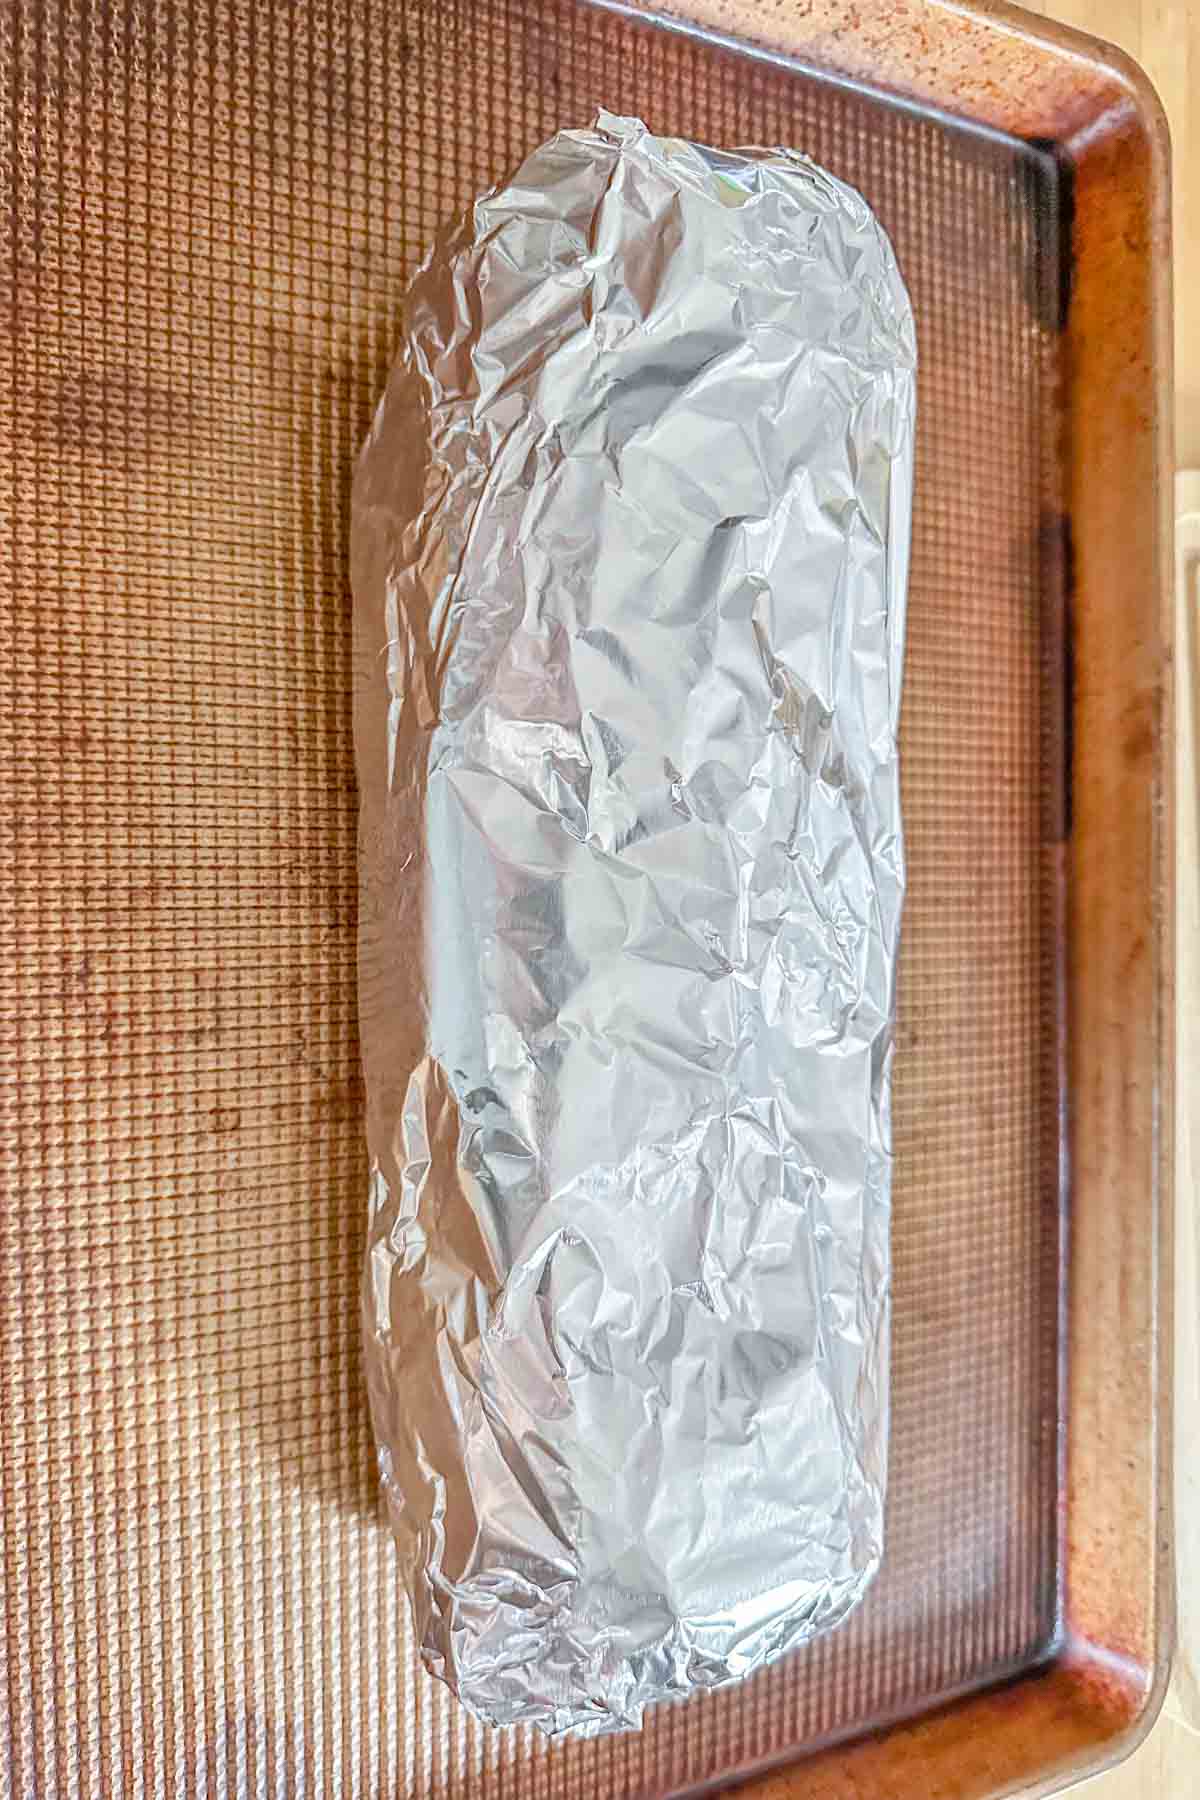 Loaf of garlic bread wrapped in foil on a baking sheet.